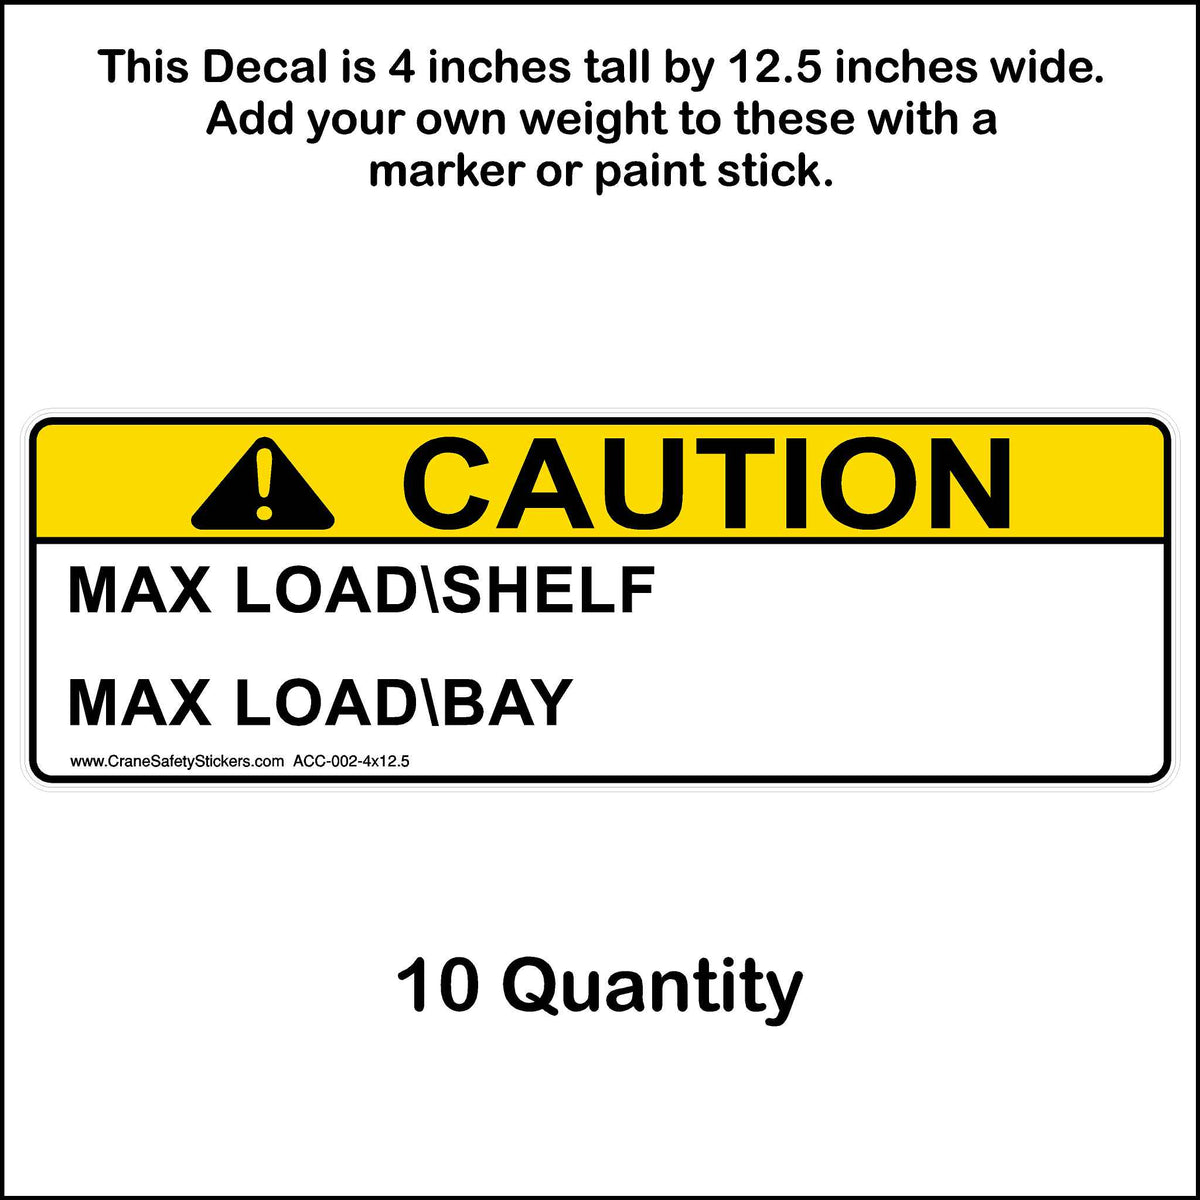 4 inch by 12.5 inch Max load shelf and max load bay sticker 10 quantity.